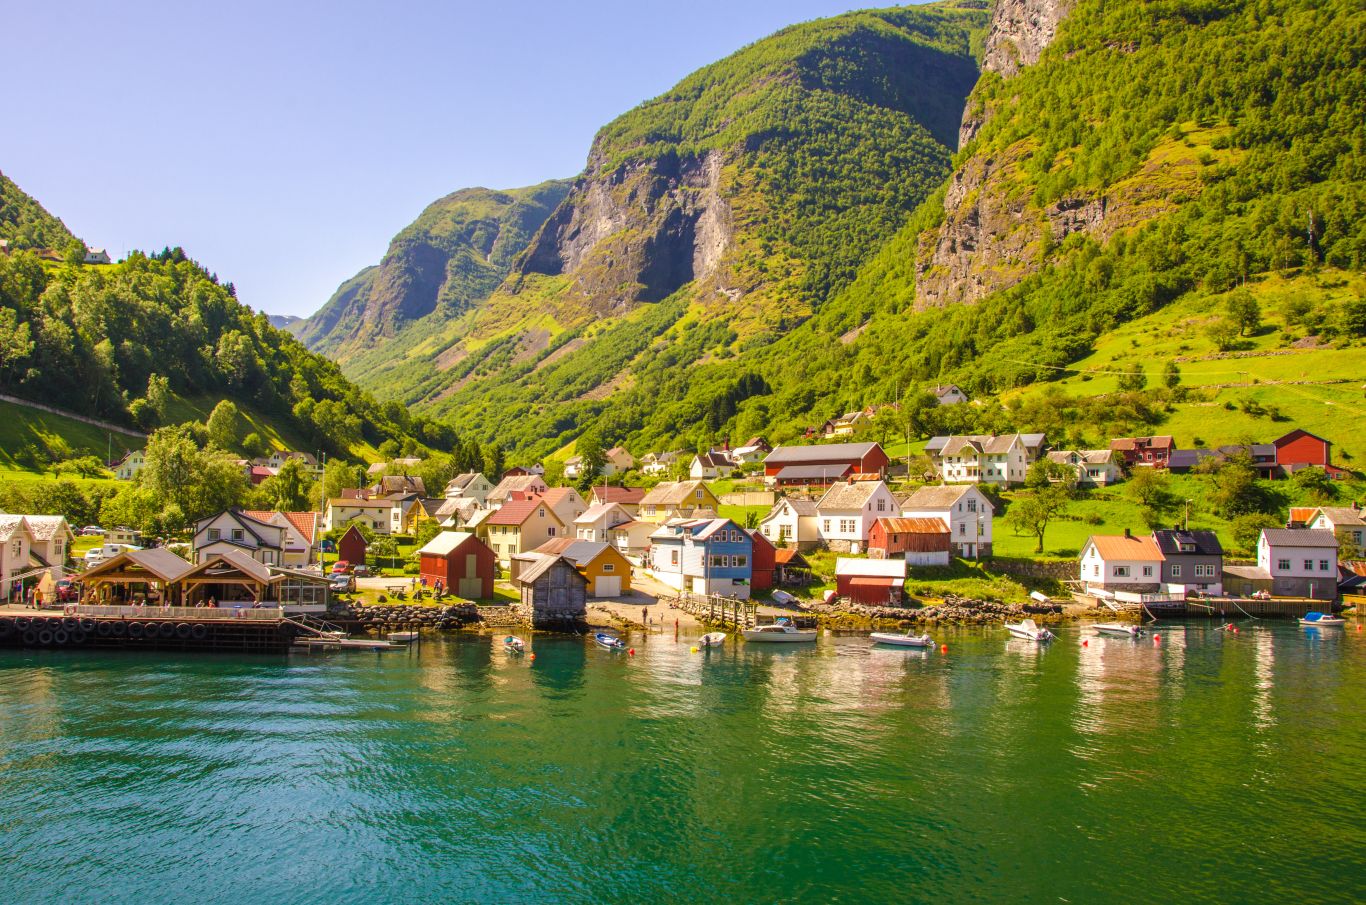 The tiny Norwegian village of Flam rewards a visit